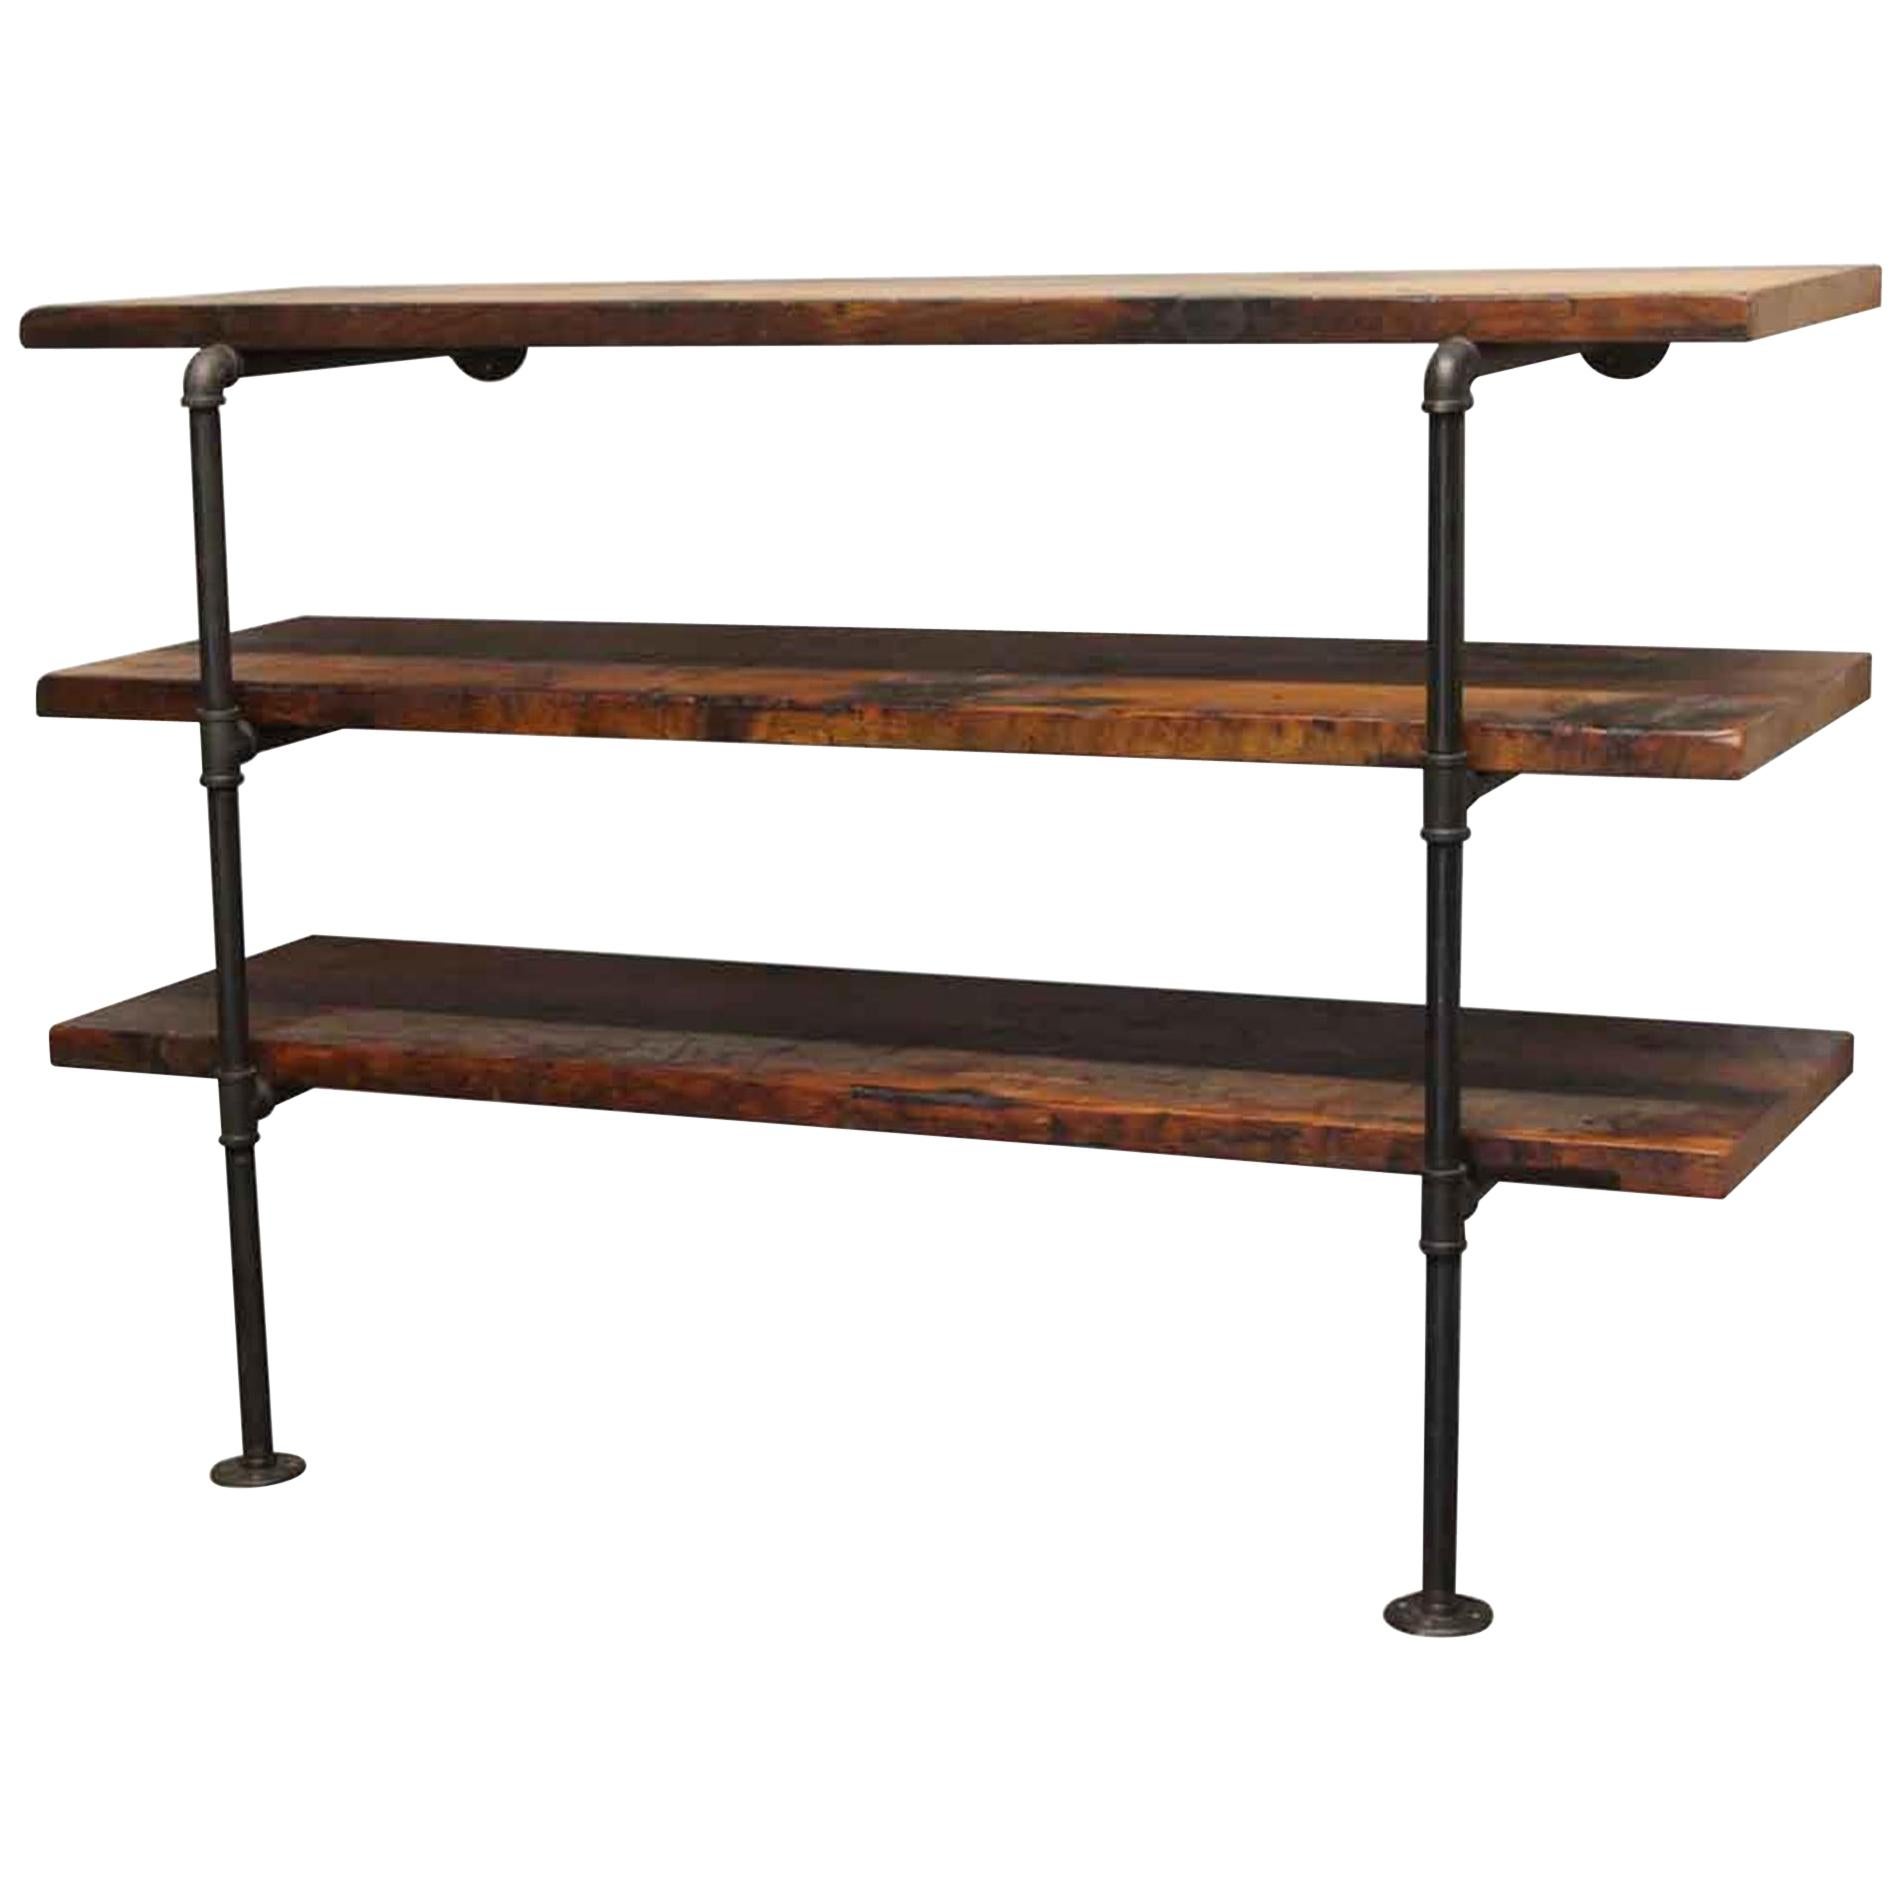 Dark Stained Pine Shelf Unit with Pipe Legs